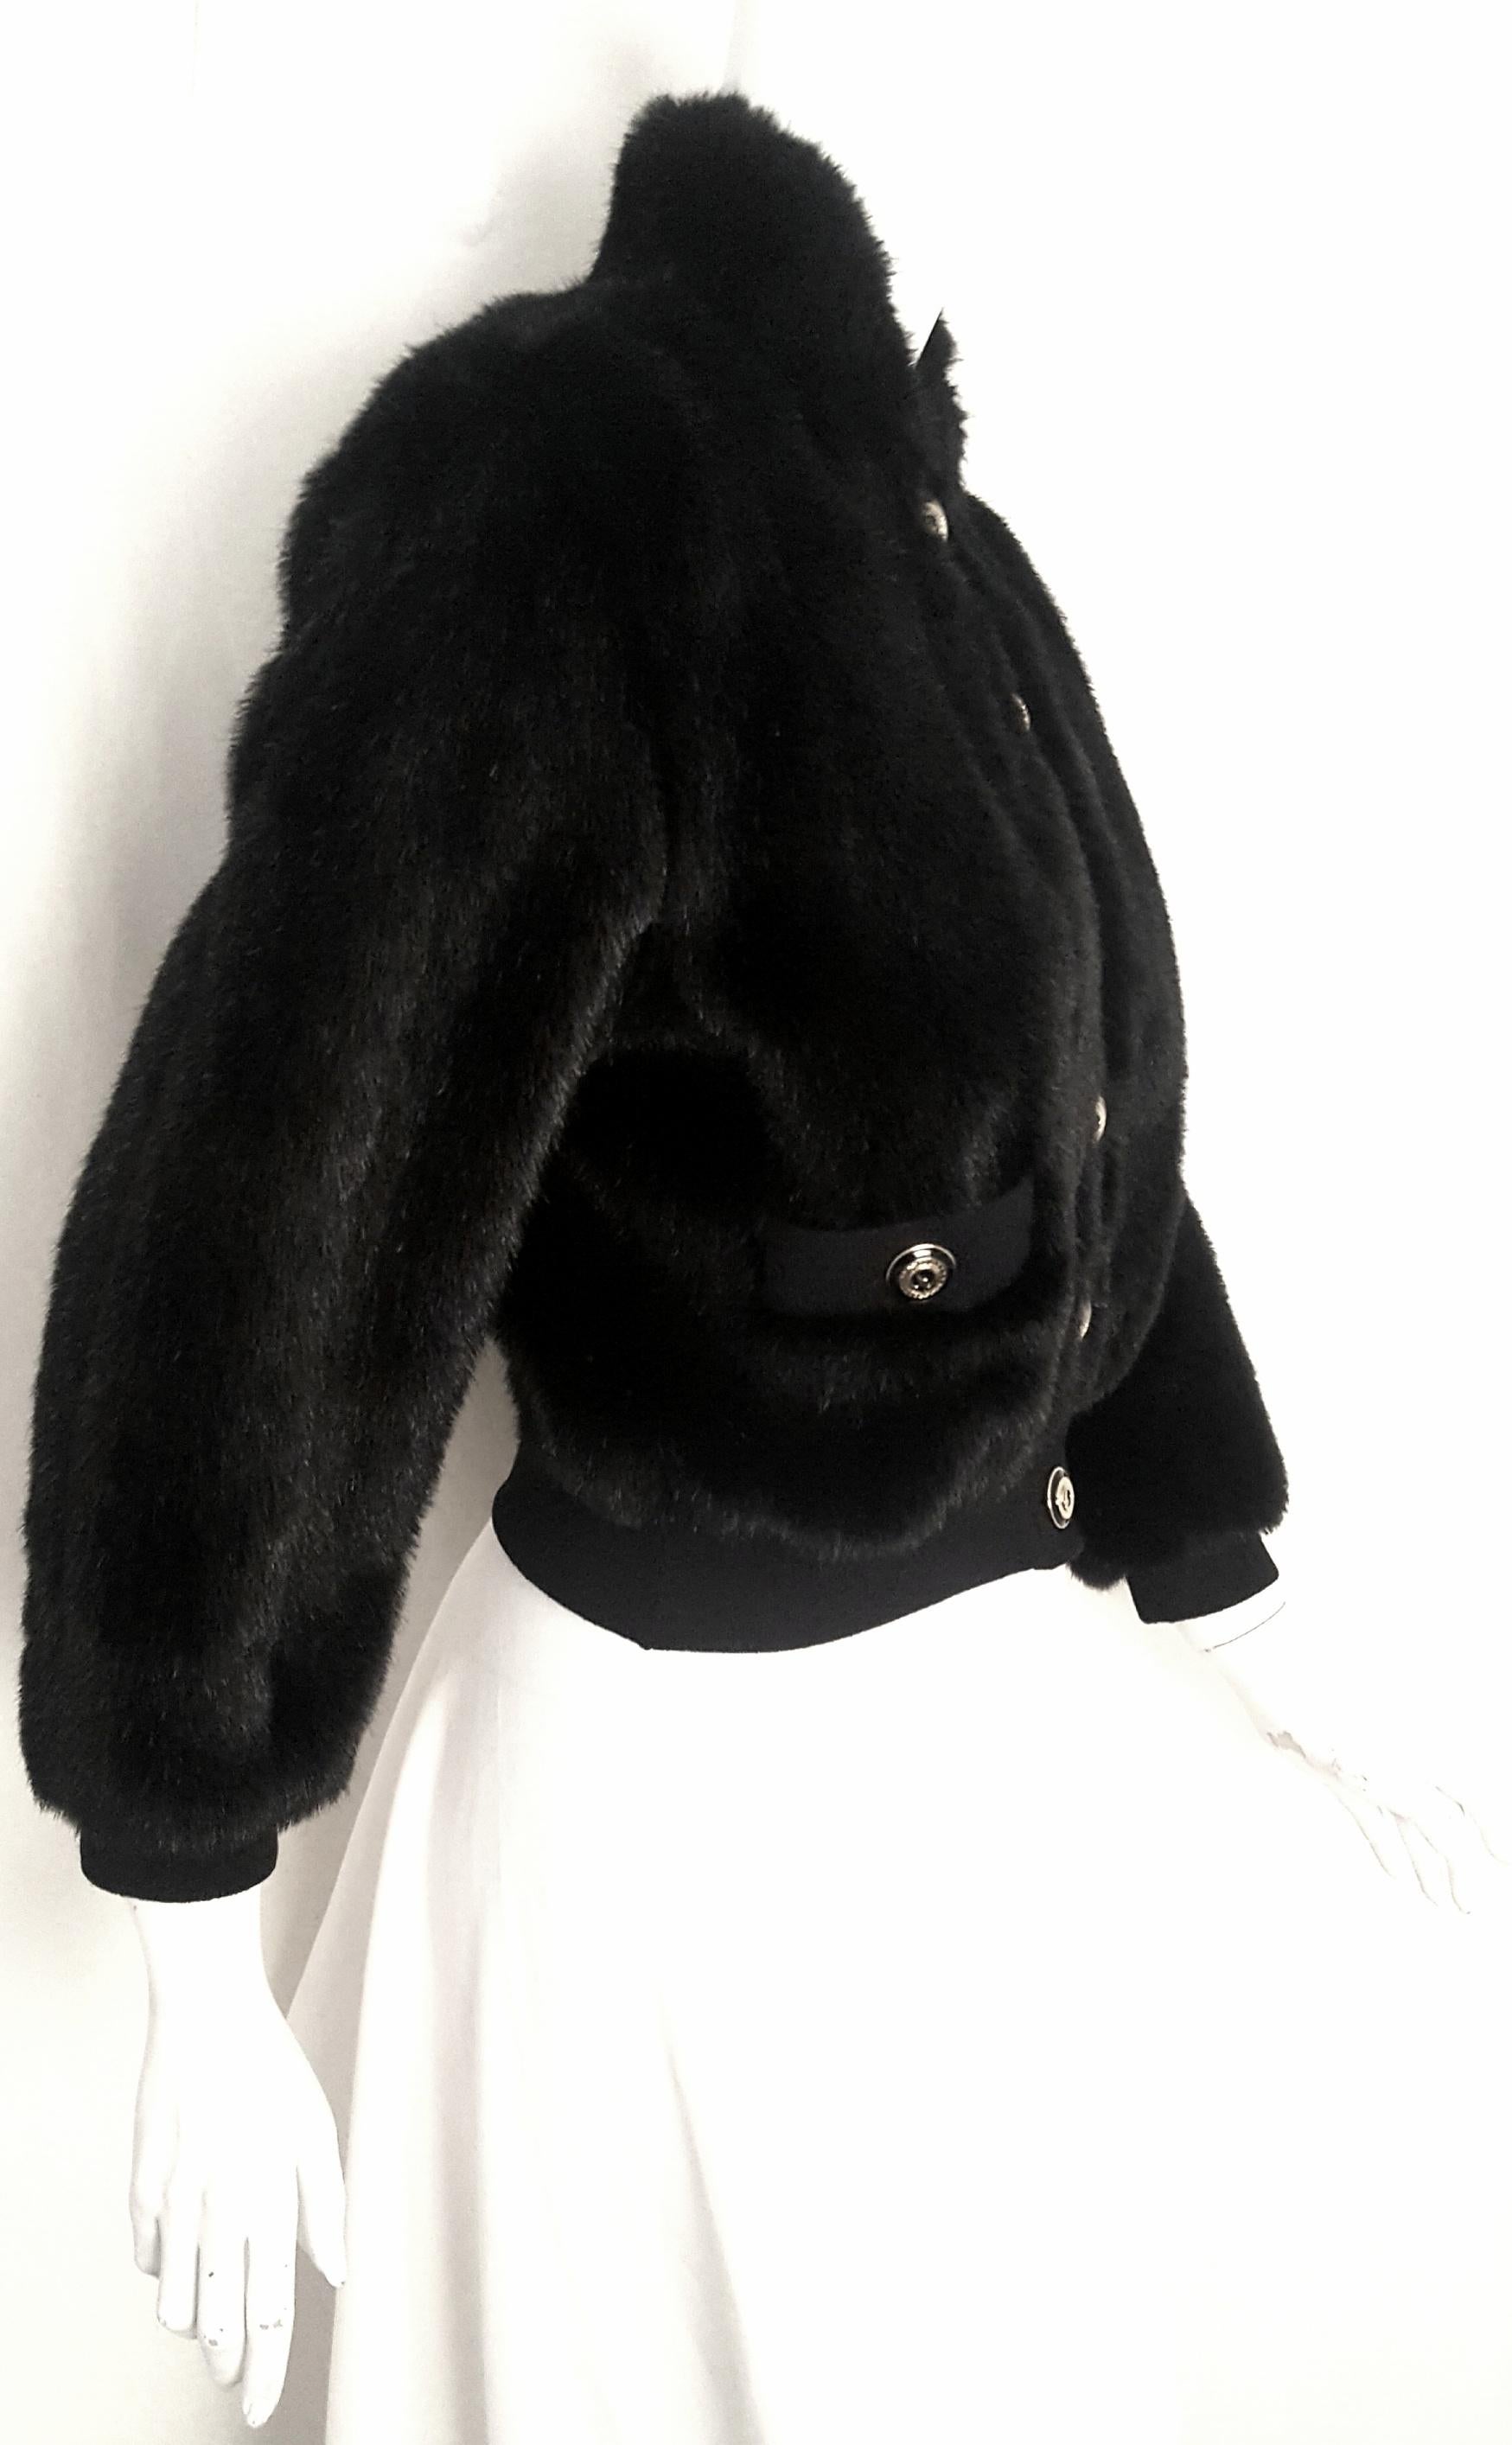 St. John black faux fur bomber style jacket is very versatile as it can be converted to from jacket to vest by removing the sleeves that are attached by a zipper at each side.  It is an outstanding Marie Gray design cropped jacket with up collar and